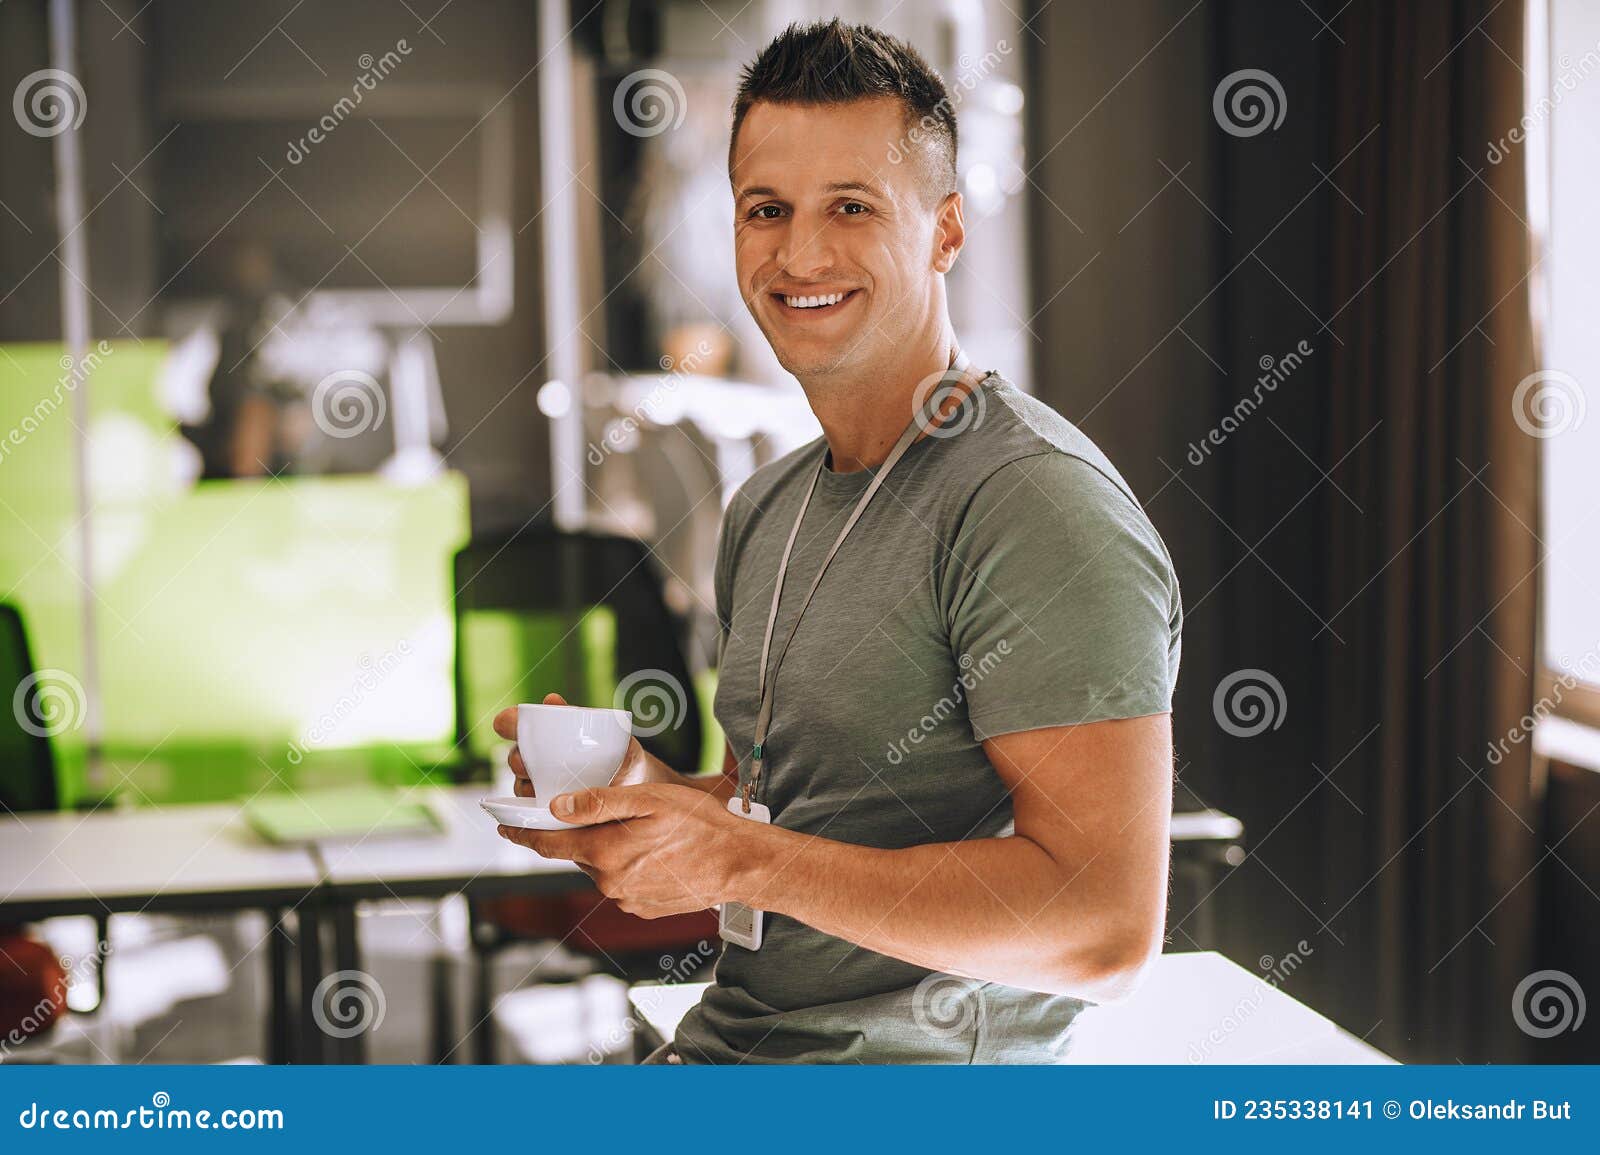 Office Worker Having Coffee while Coffee Break Stock Image - Image of ...